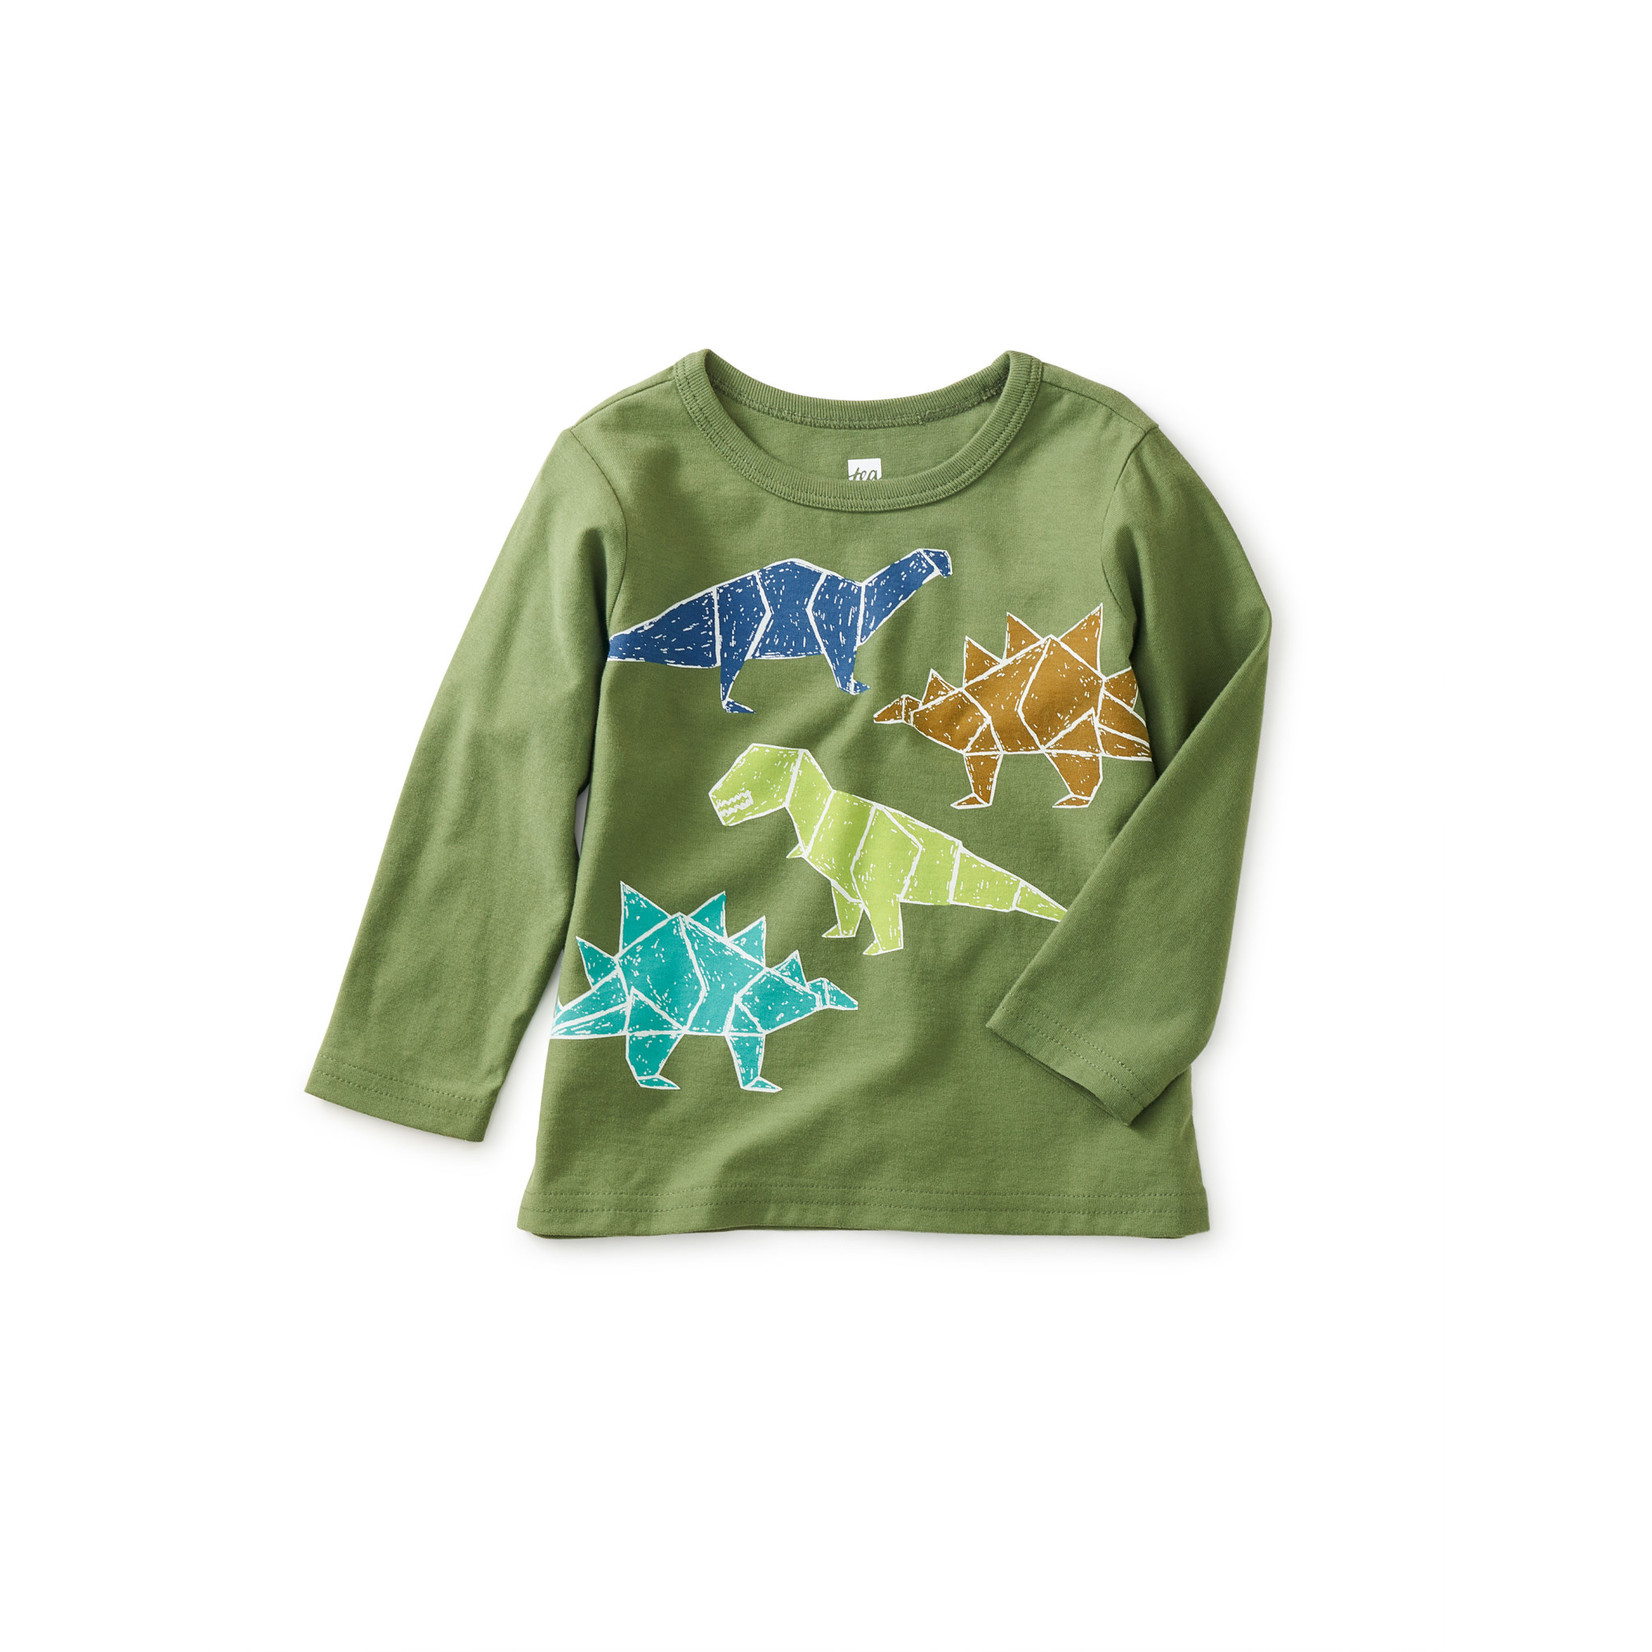 Tea Collection Dino Friends Baby Graphic Tee - Stem